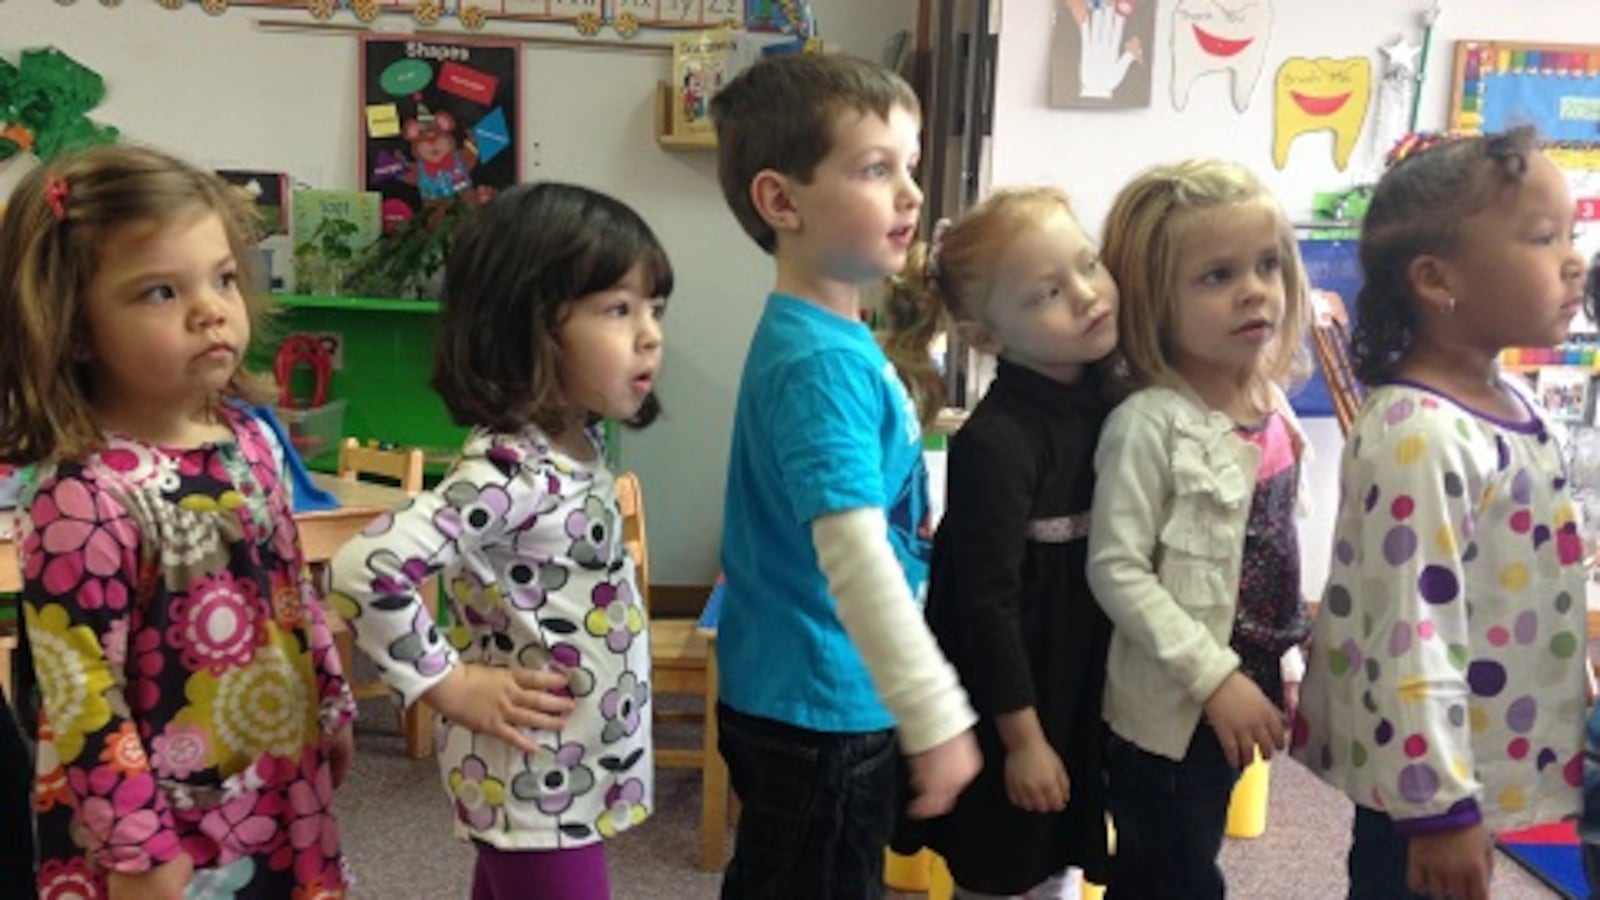 Children in the "3s" class at Promise Christian Preschool in Lafayette line up before circle time.